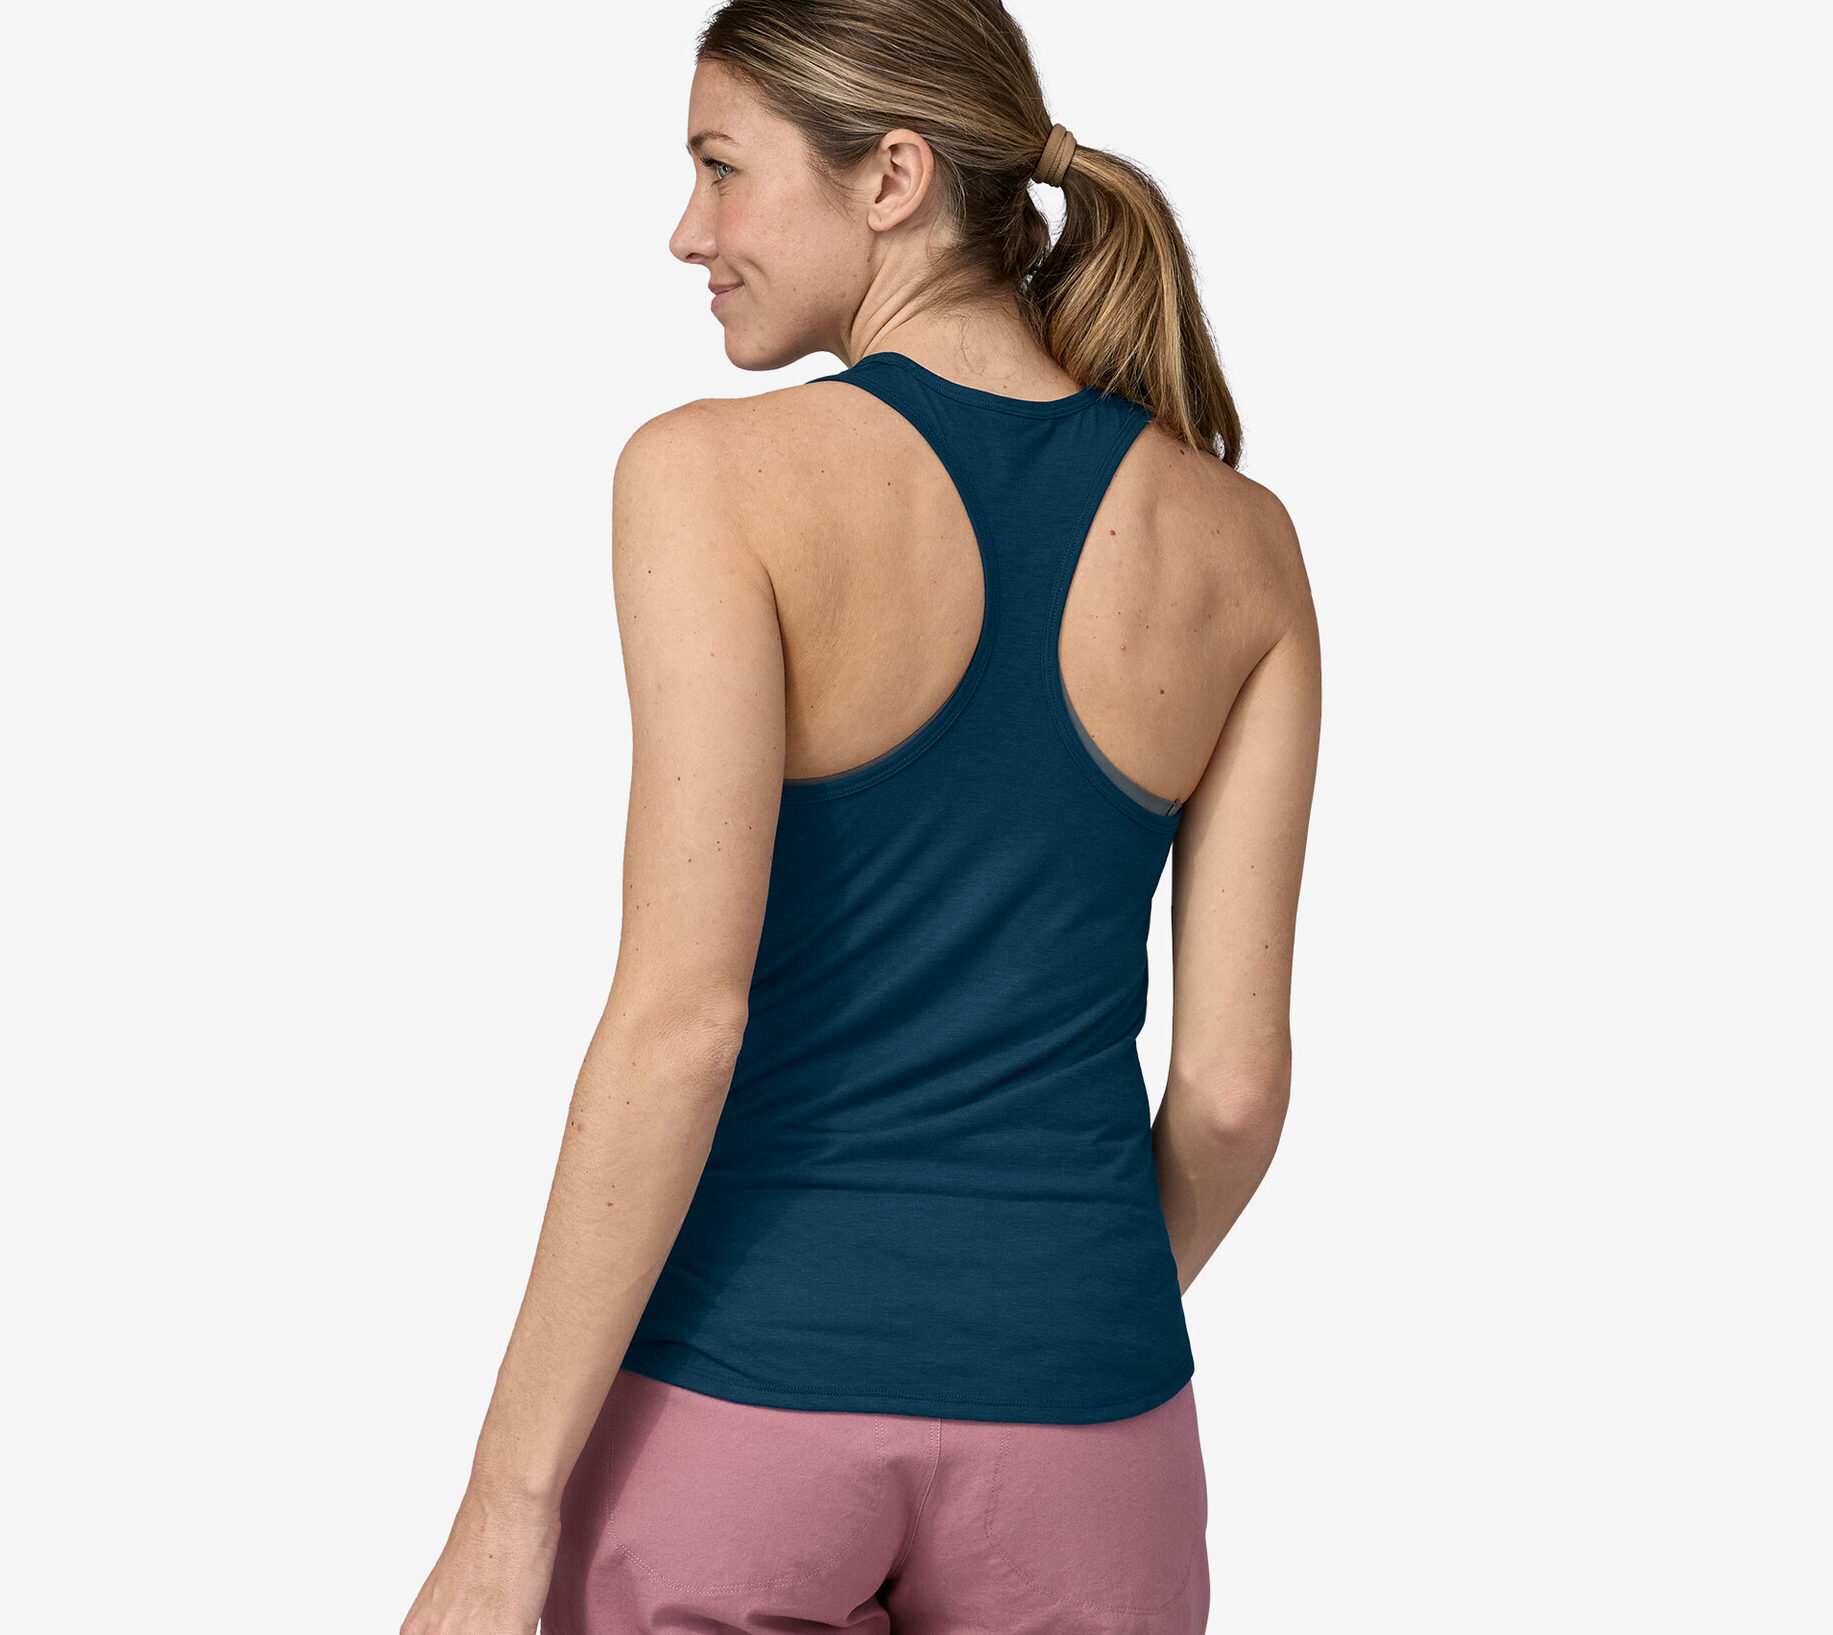 The Perfect Tank Top For An Active Lifestyle – “Women’s CapileneÂ® Cool Trail Tank Top”